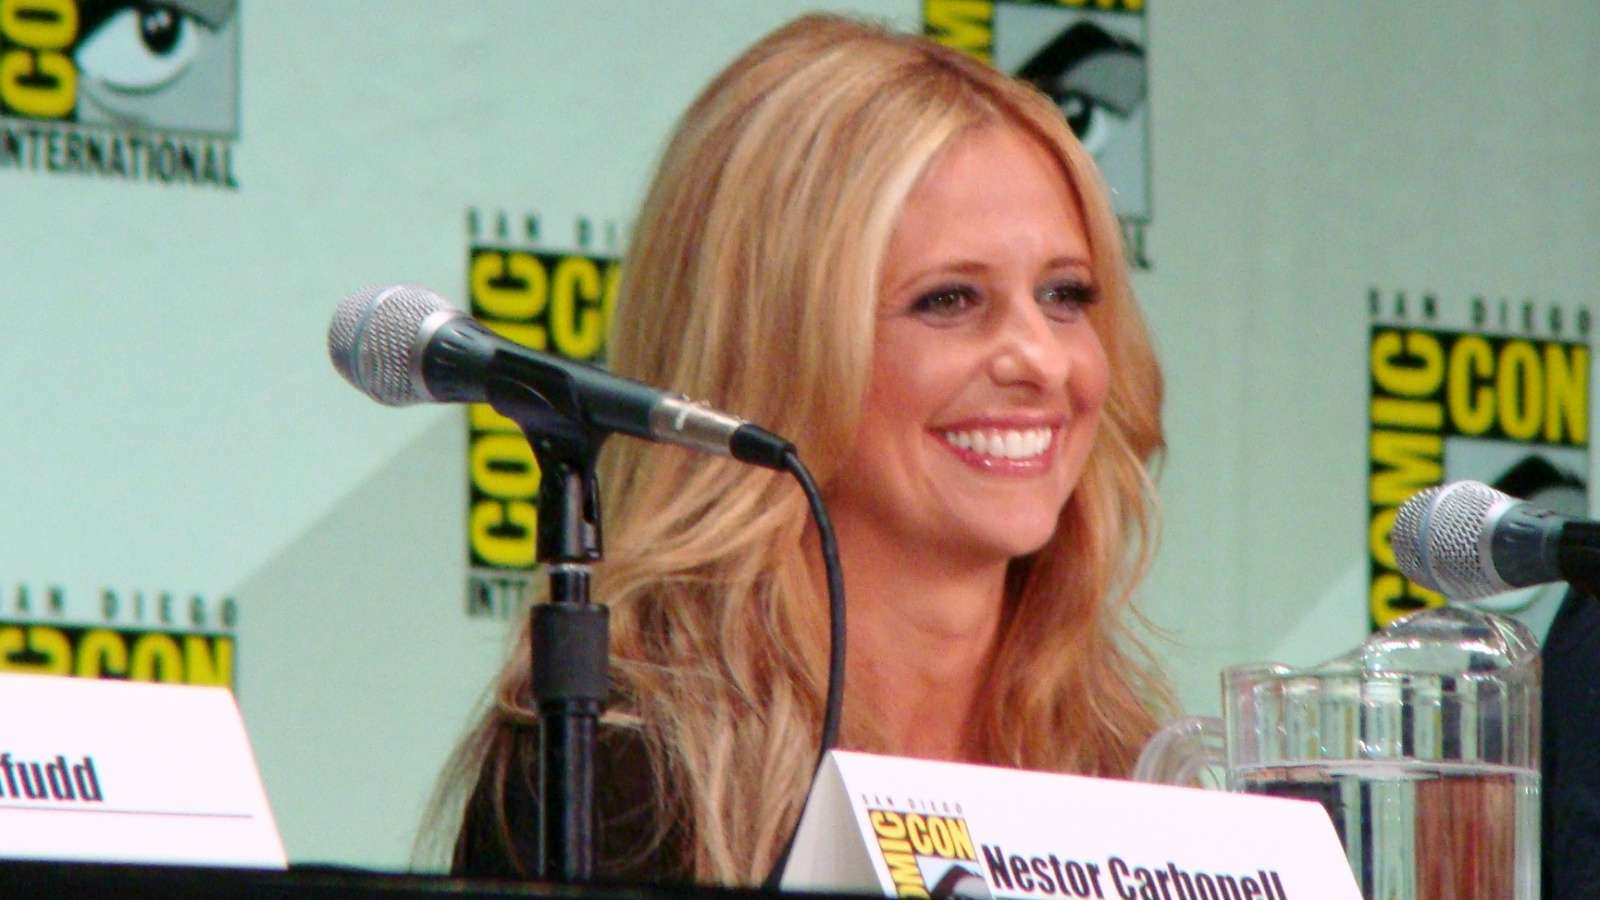 Sarah Michelle Gellar answering fan questions at a ComicCon panel